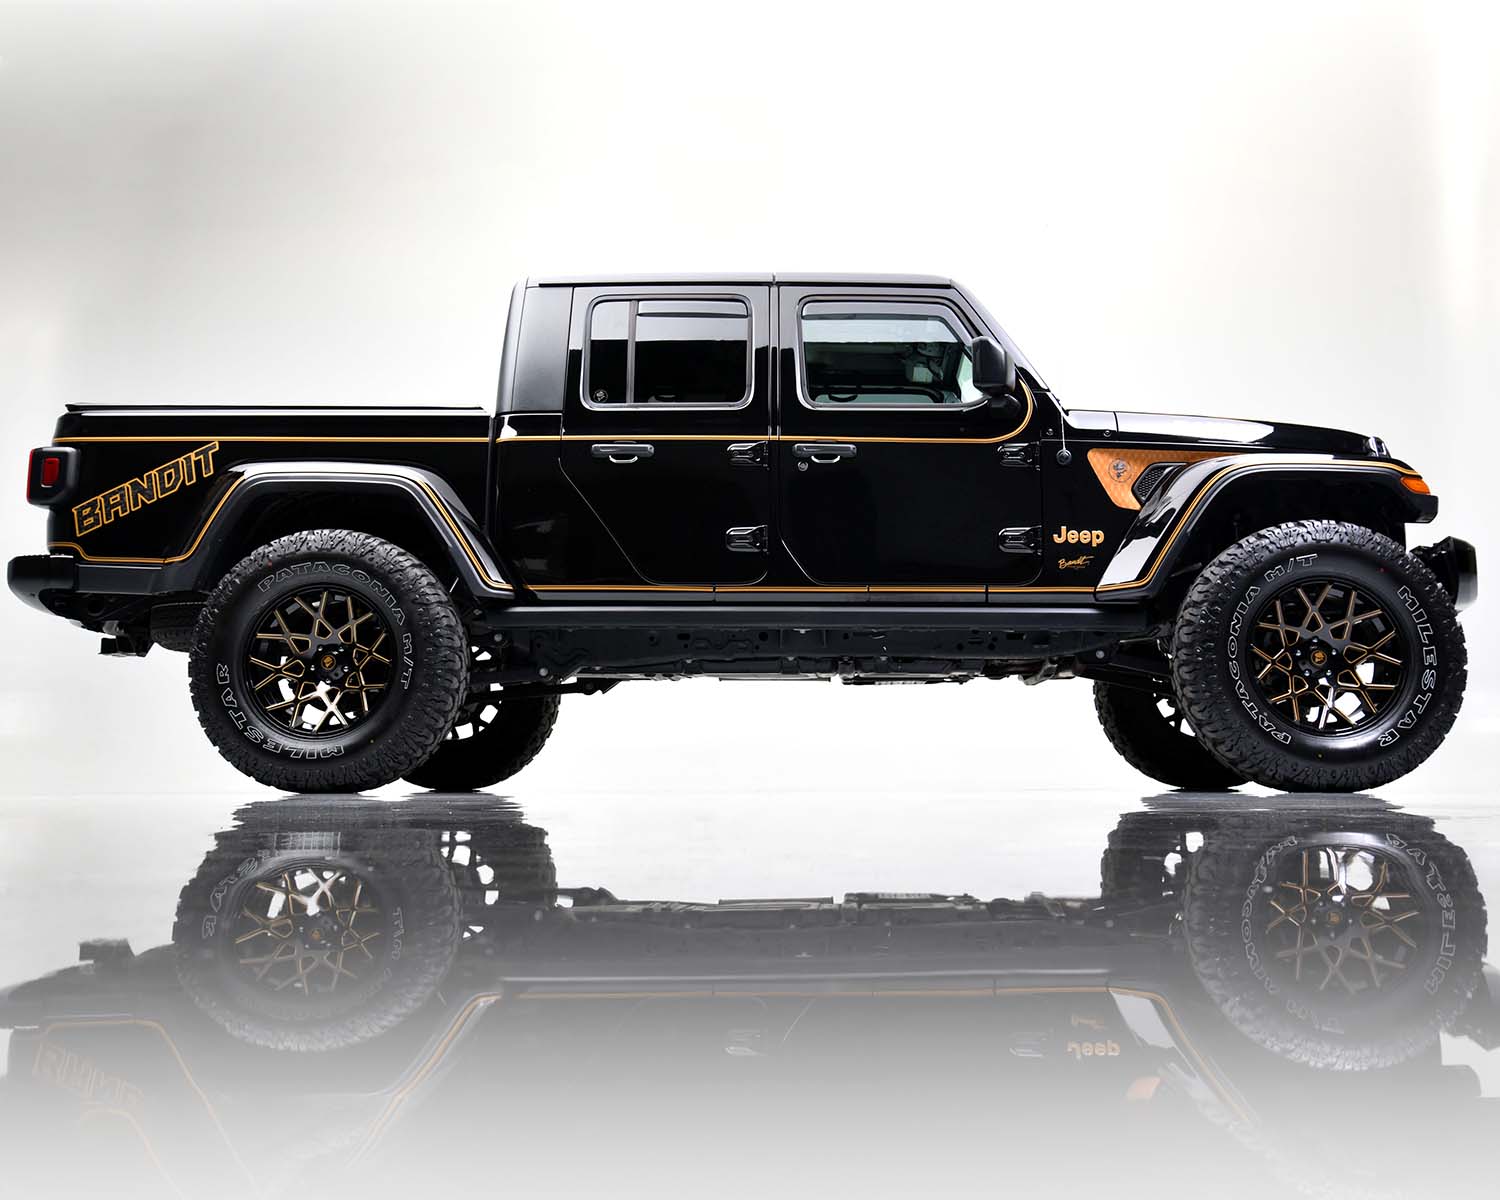 This Smokey and the Bandit-Inspired Jeep Gladiator Is One Sweet Tribute  Truck - autoevolution